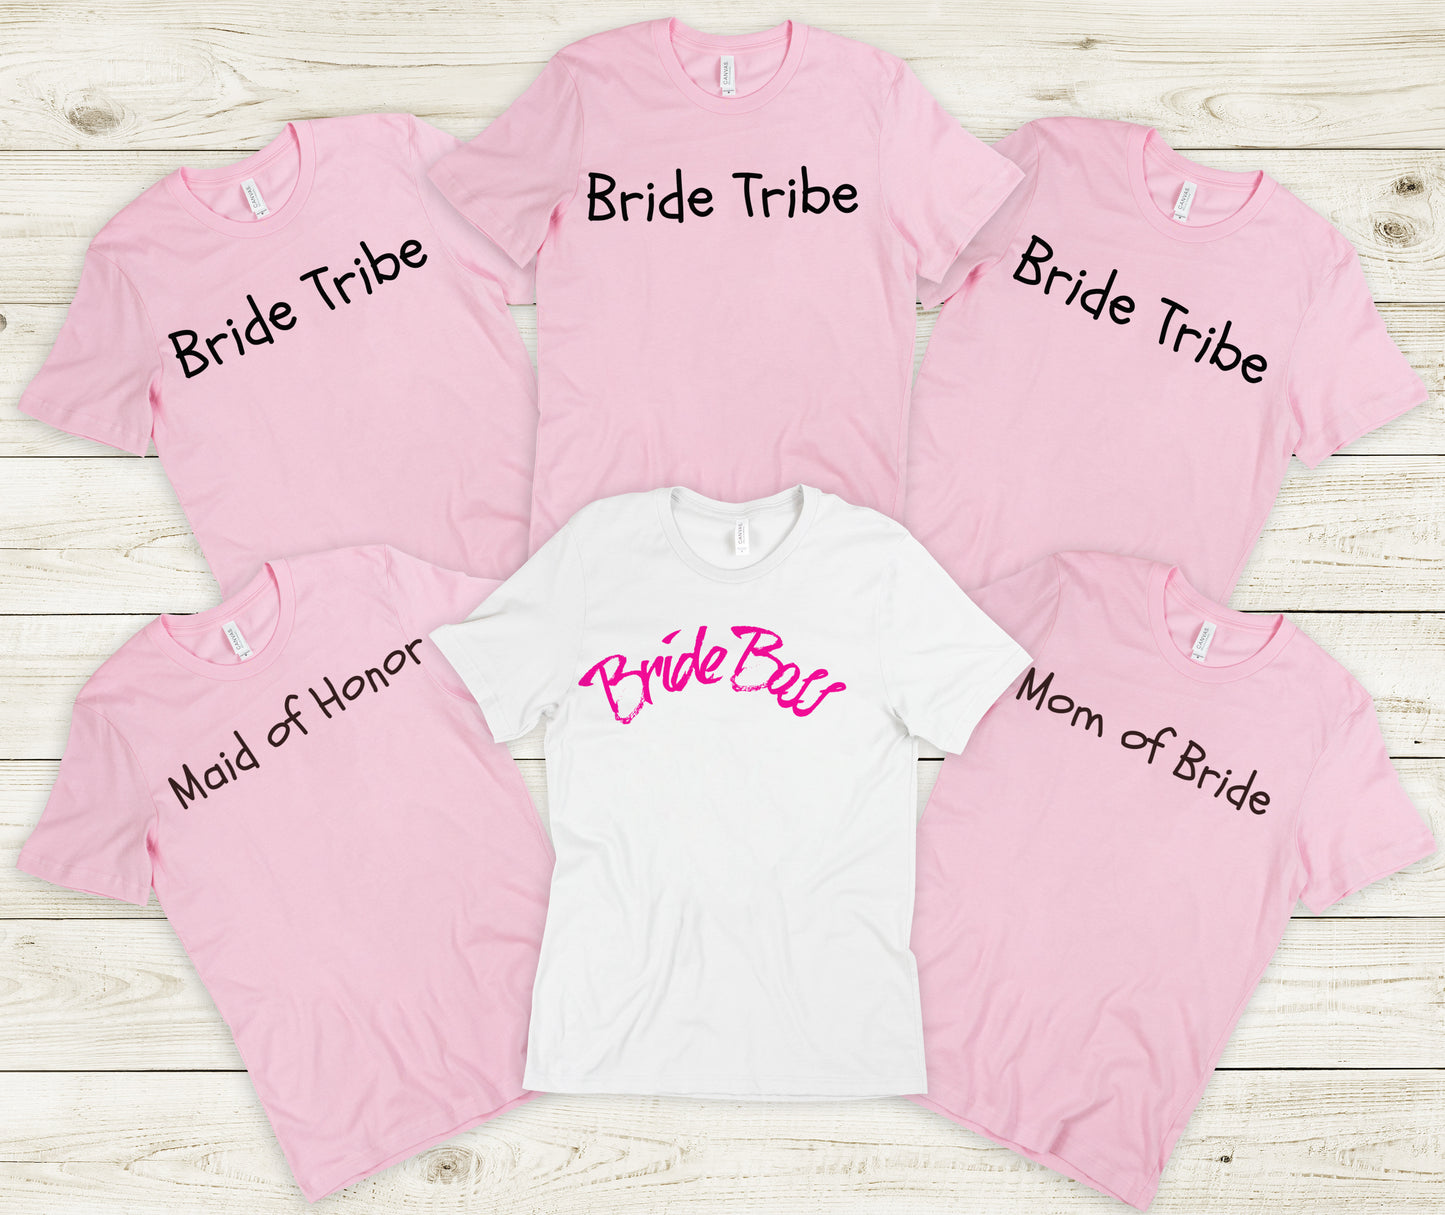 white Bride Boss bridal tshirt and pink Bride Tribe bridesmaid shirts in unisex sizing small to 3X